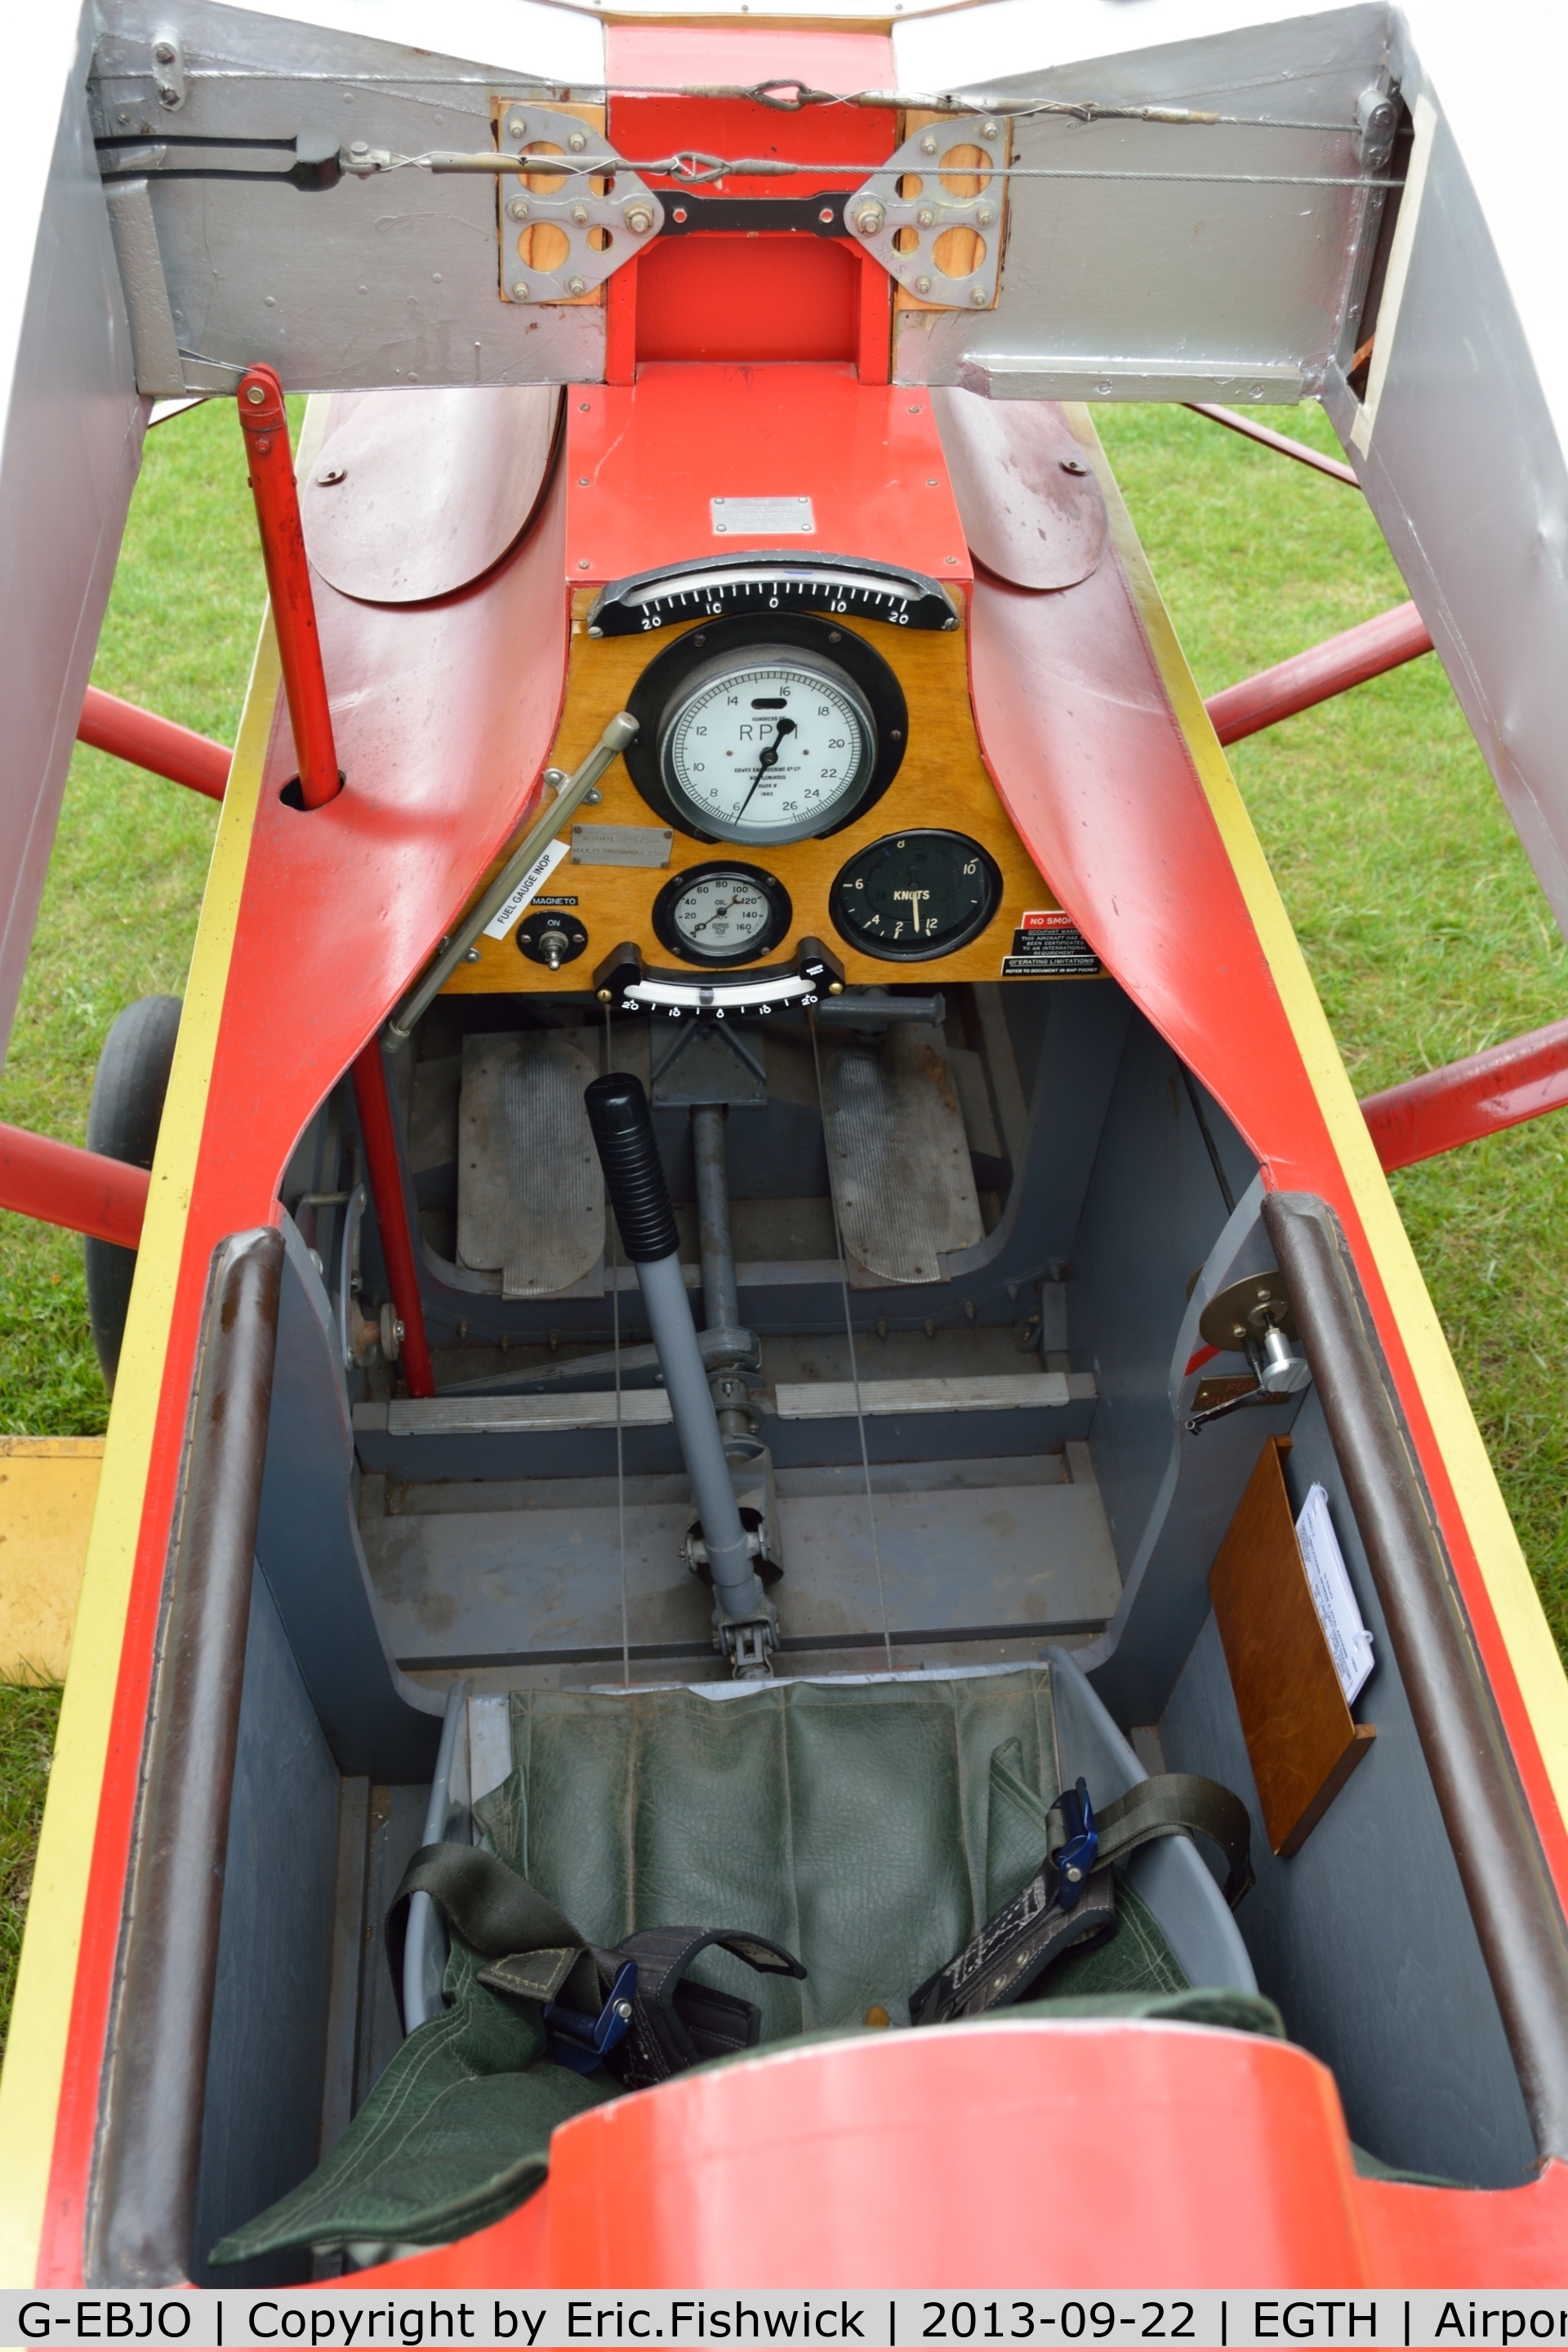 G-EBJO, 1924 Air Navigation And Engineering ANEC II C/N 1, Cockpit - at Shuttleworth Uncovered Air Display, Sept. 2013